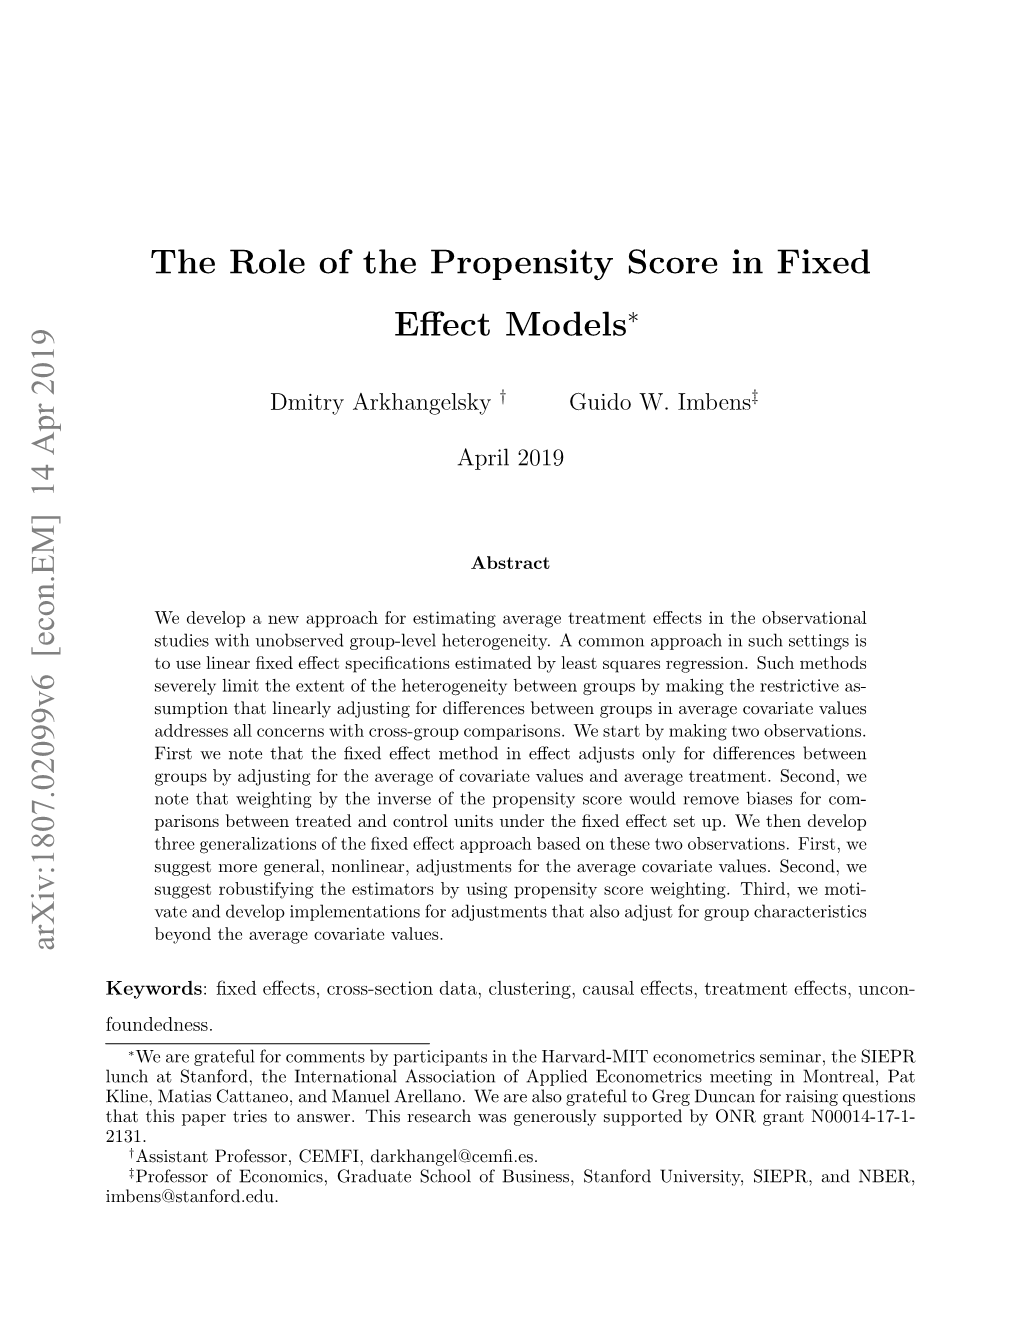 The Role of the Propensity Score in Fixed Effect Models